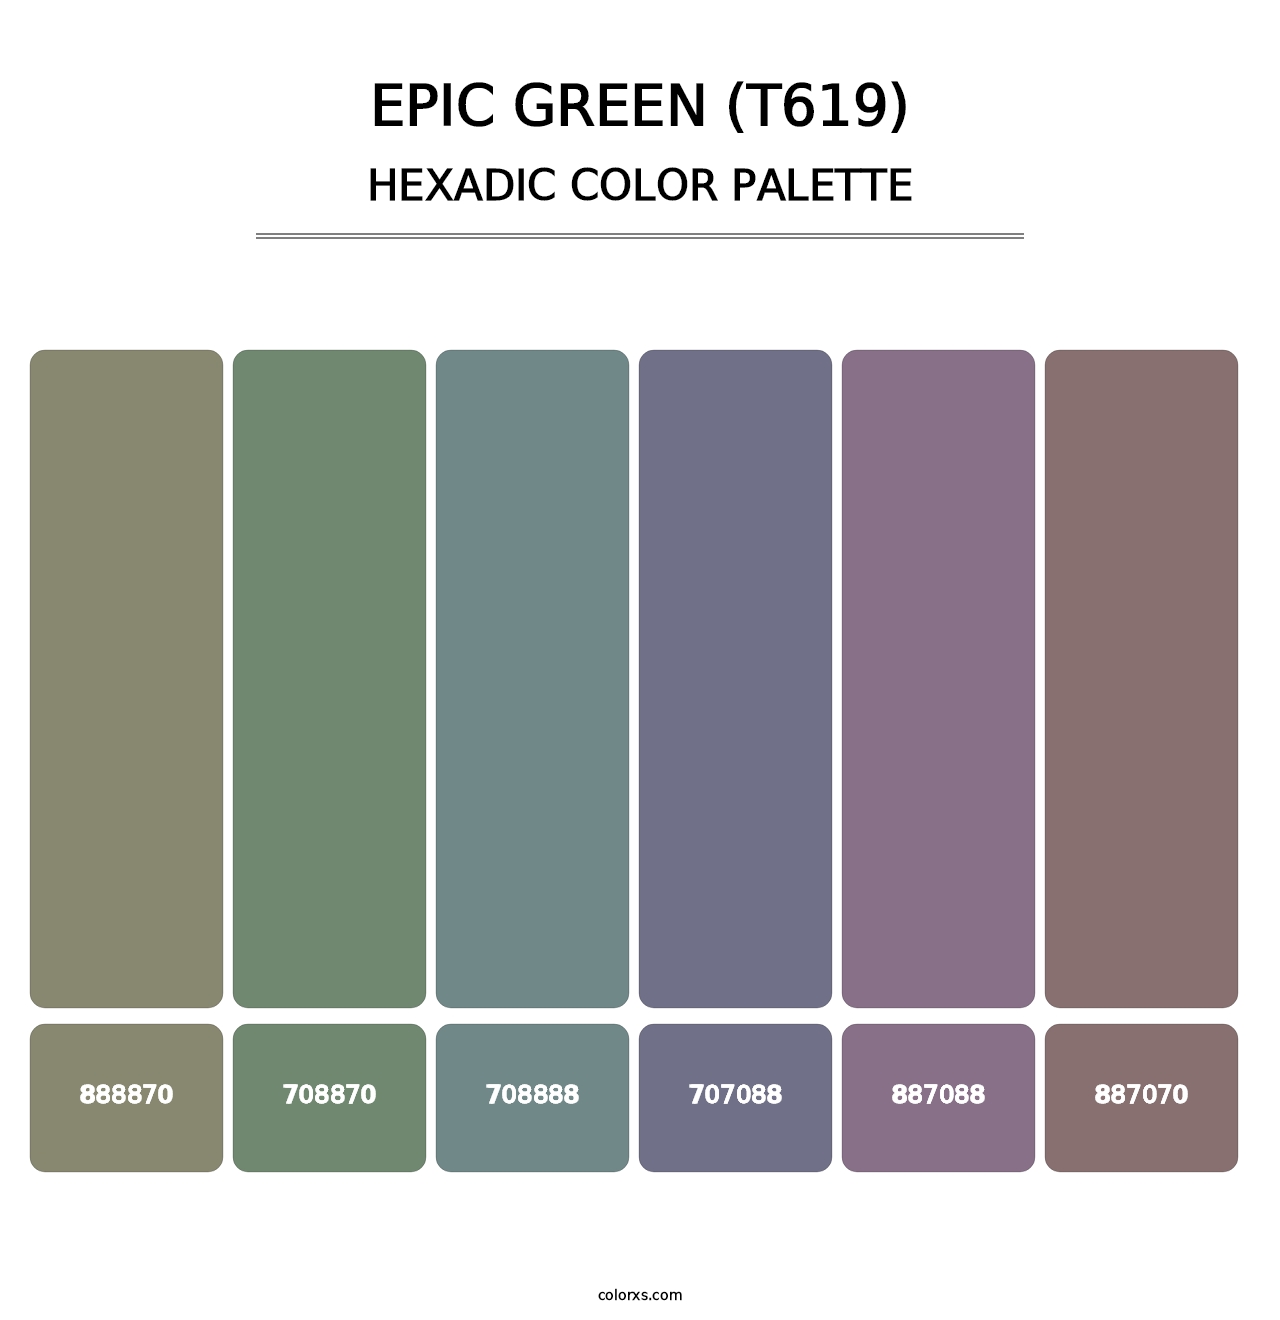 Epic Green (T619) - Hexadic Color Palette